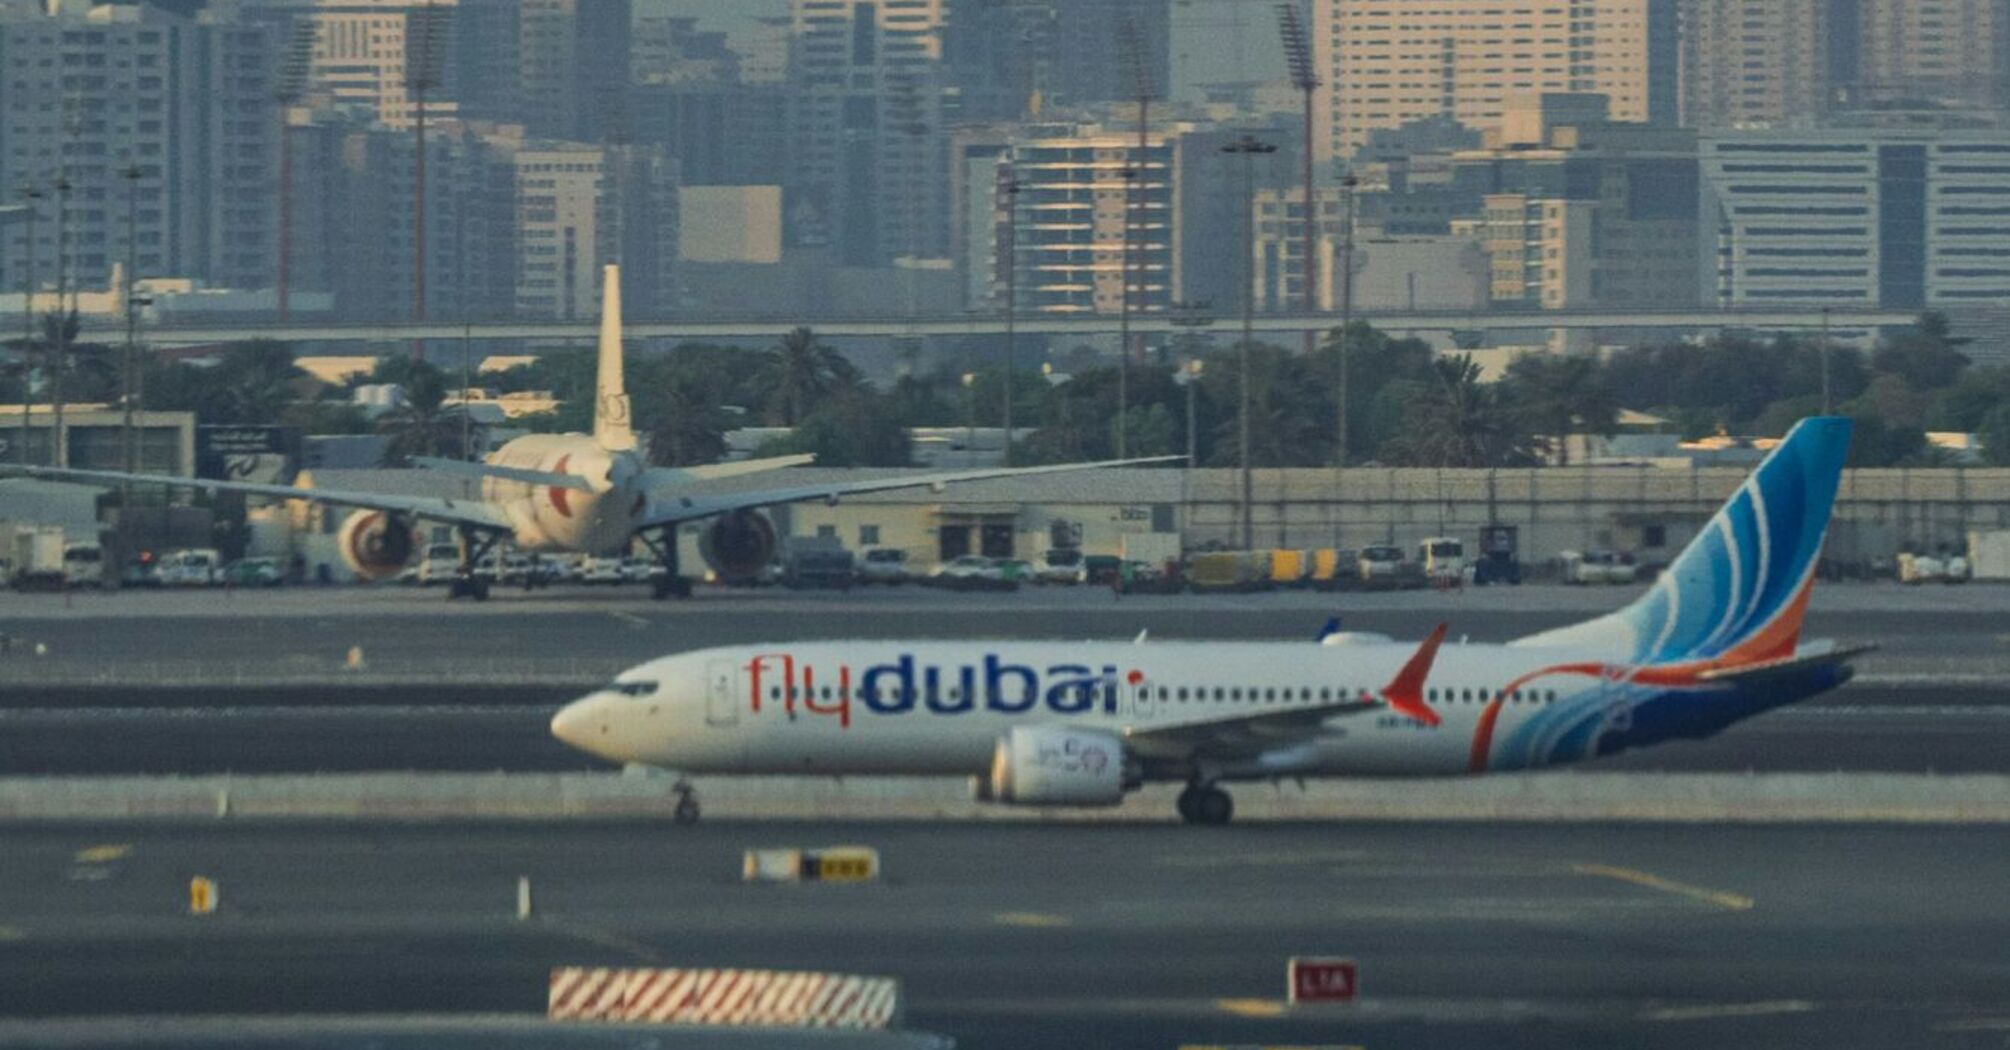 Airplane from flydubai on a runway with city buildings in the background